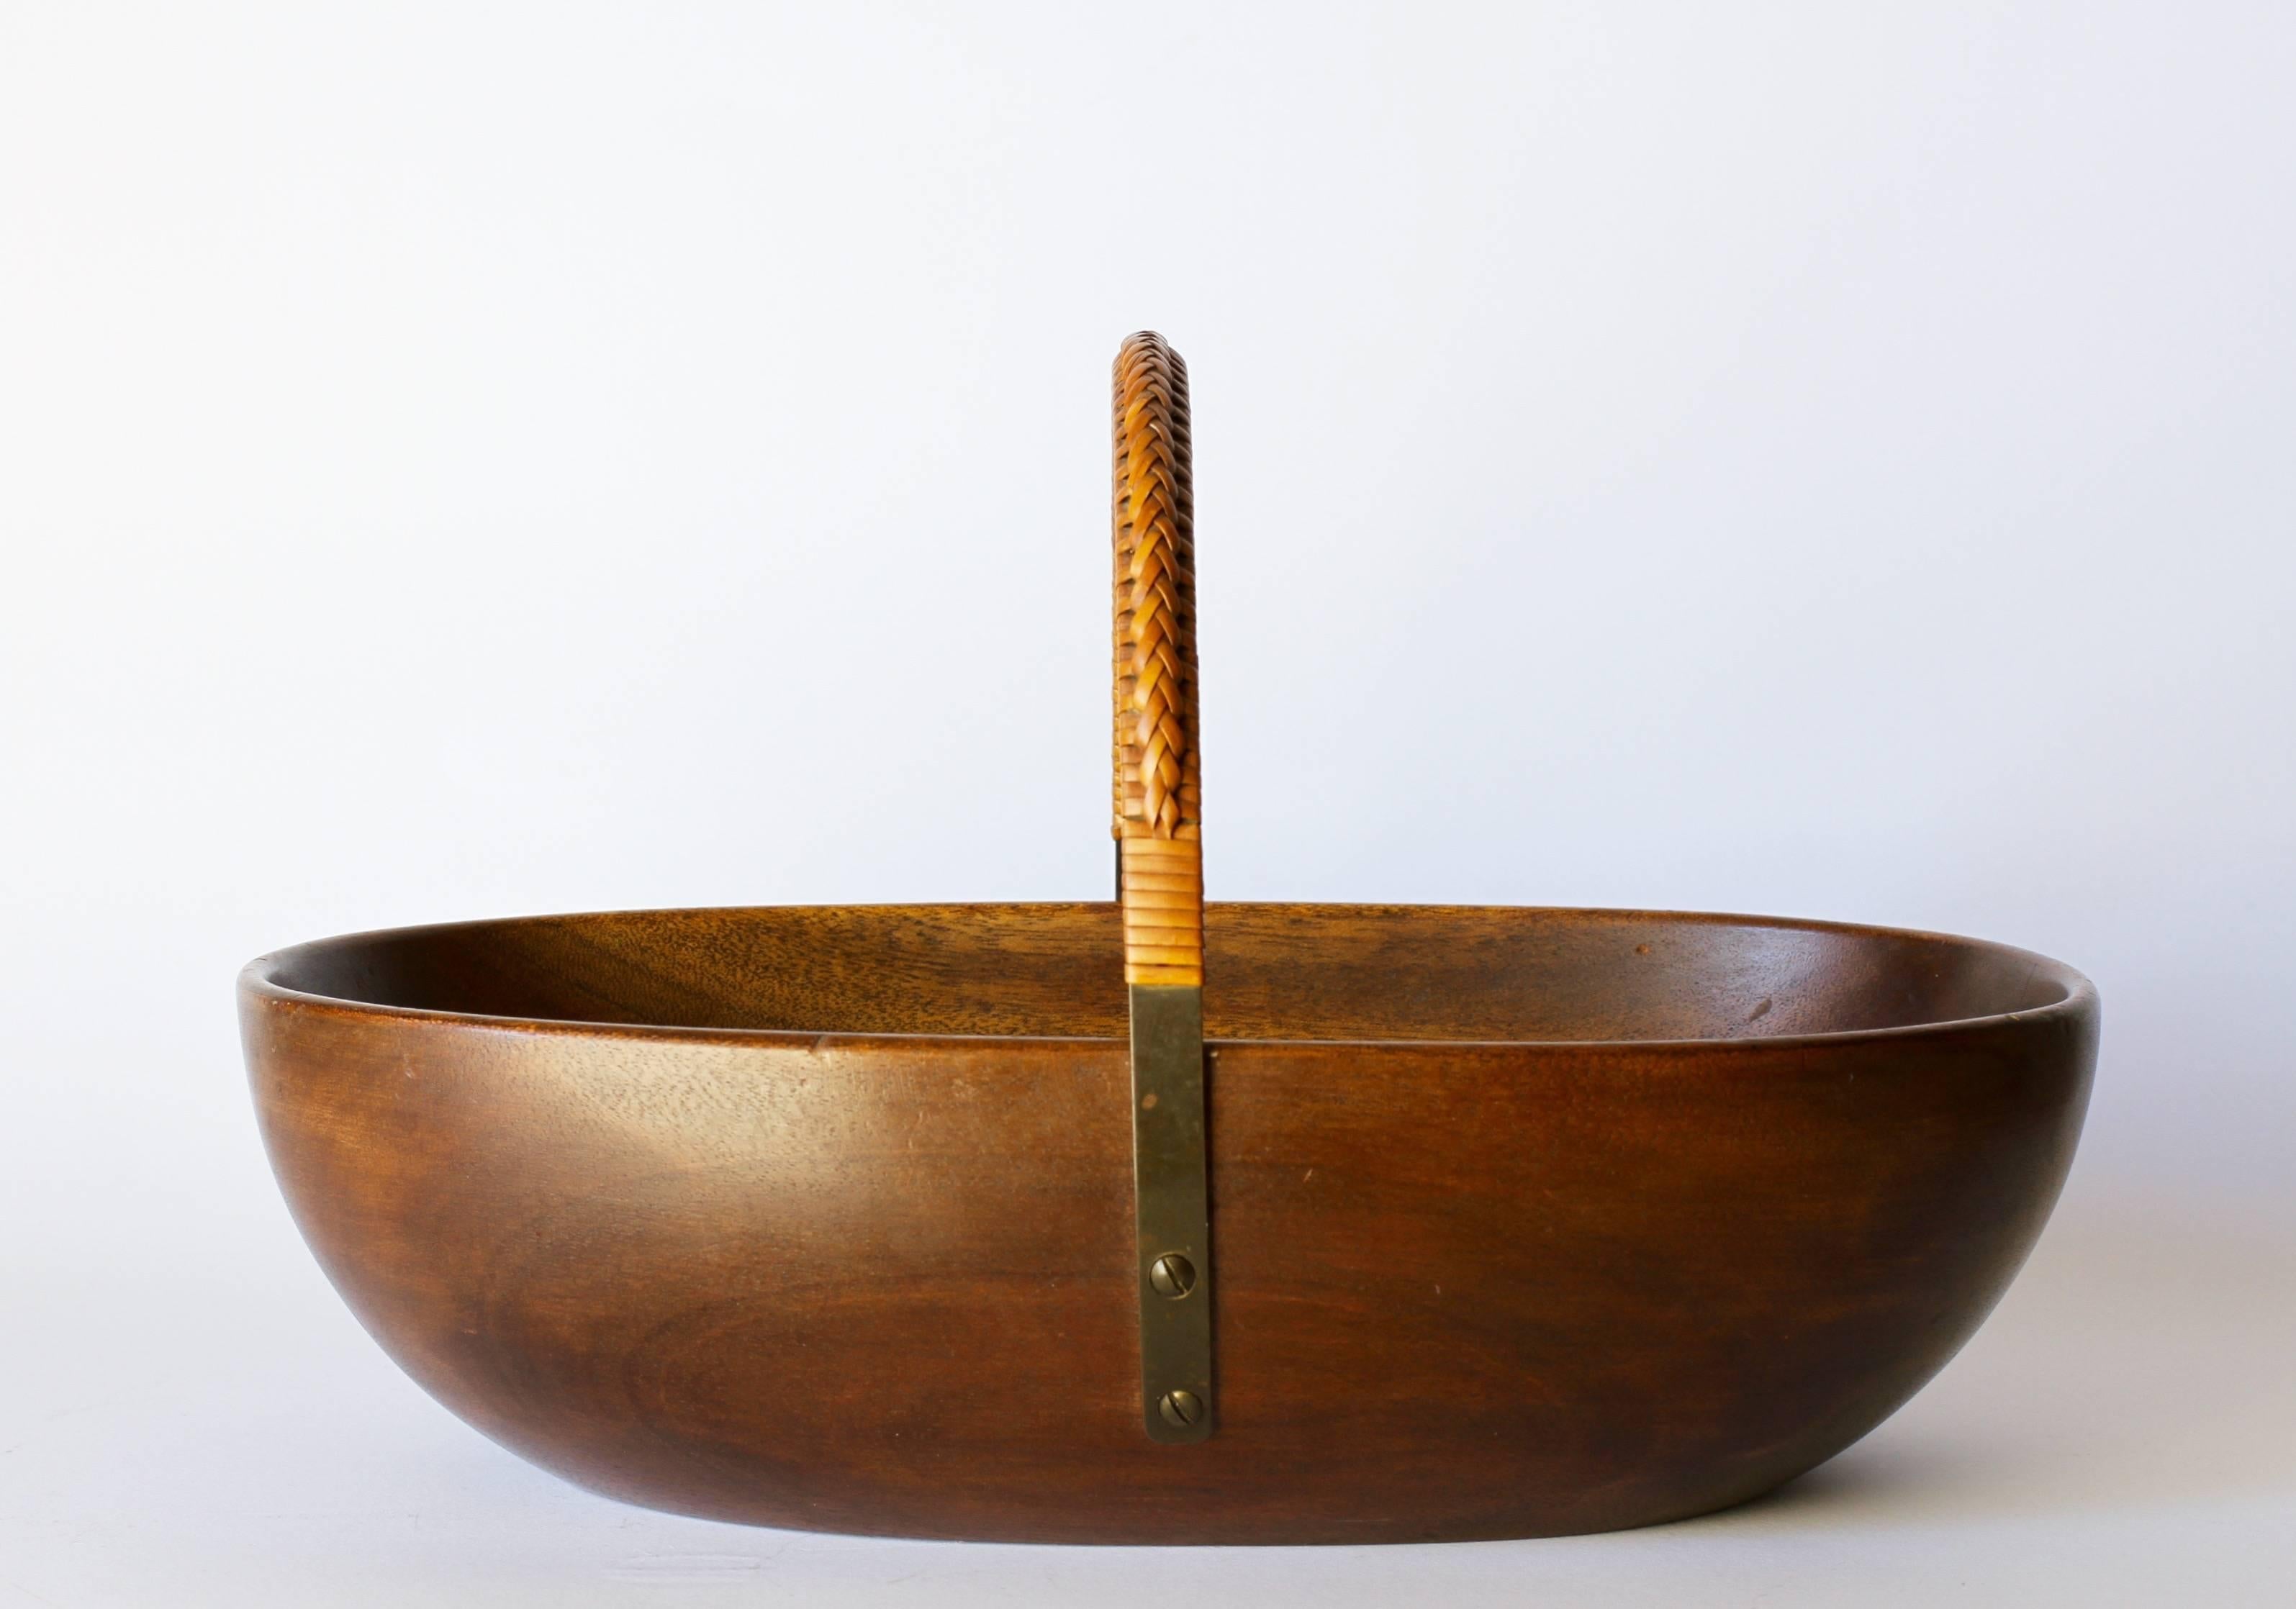 Hand-carved mahogany nut bowl by Carl Auböck, Austria, circa 1955. This beautifully made bowl features a curved brass handle which follows the lines and shape of the bowl with delicately woven or weaved rattan.

Model A-436.